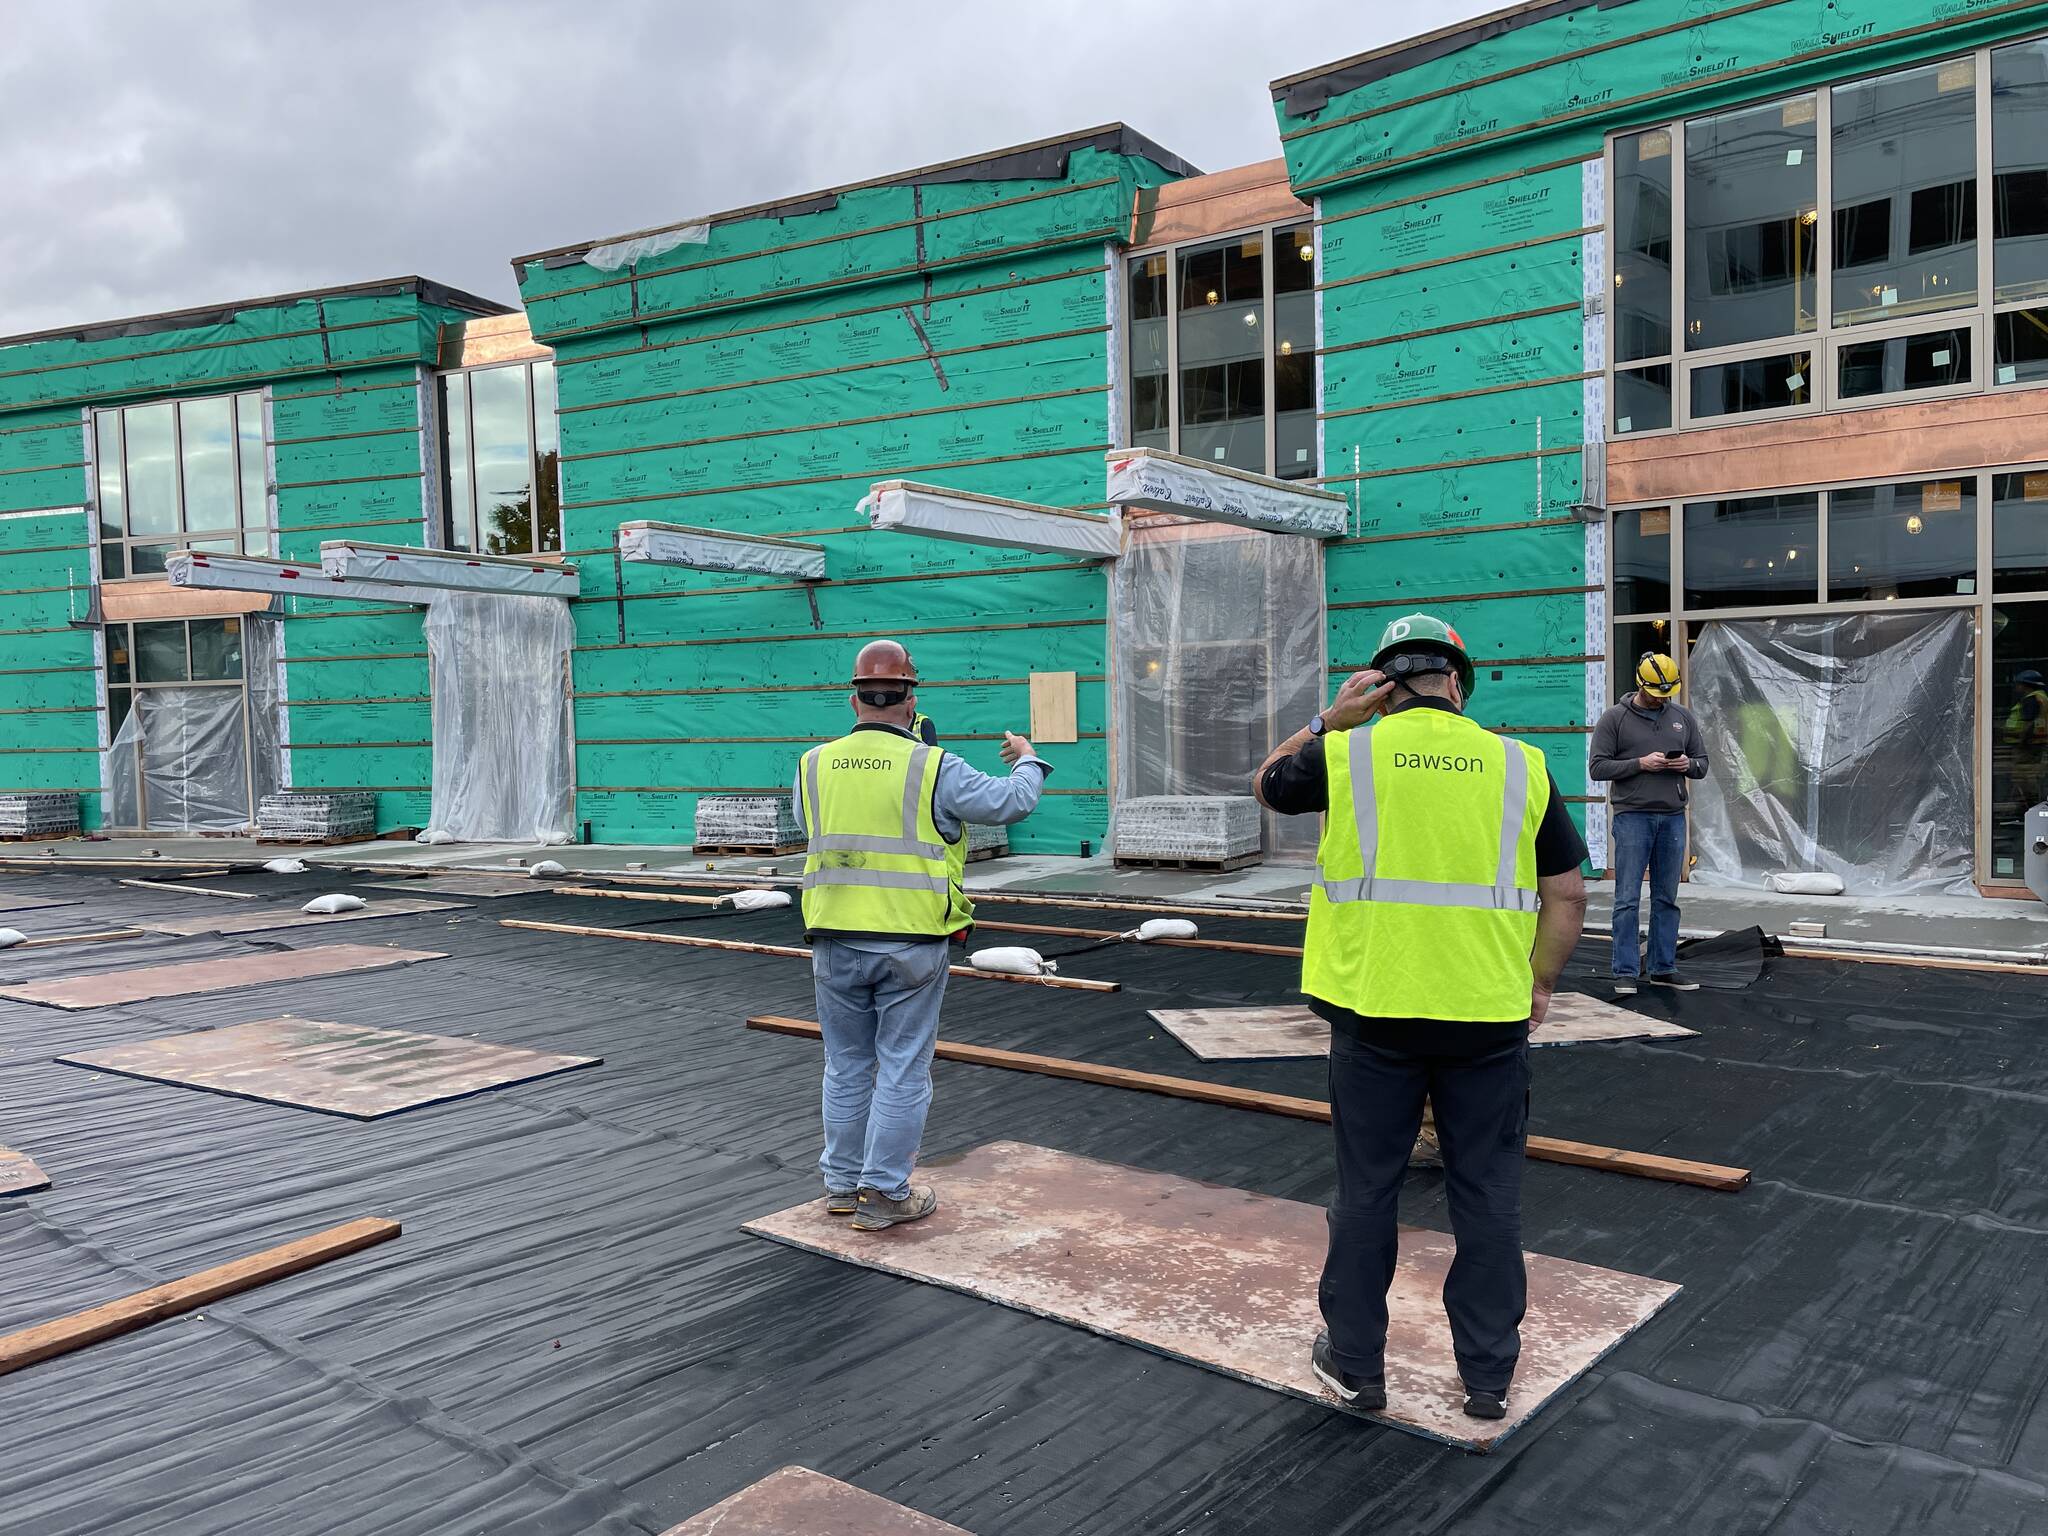 Workers make progress on the Sealaska Heritage Institute’s Northwest Coast arts campus on Sept. 24. Supply chain issues and material shortages have been a factor for local construction projects this year. (Michael S. Lockett/Juneau Empire)